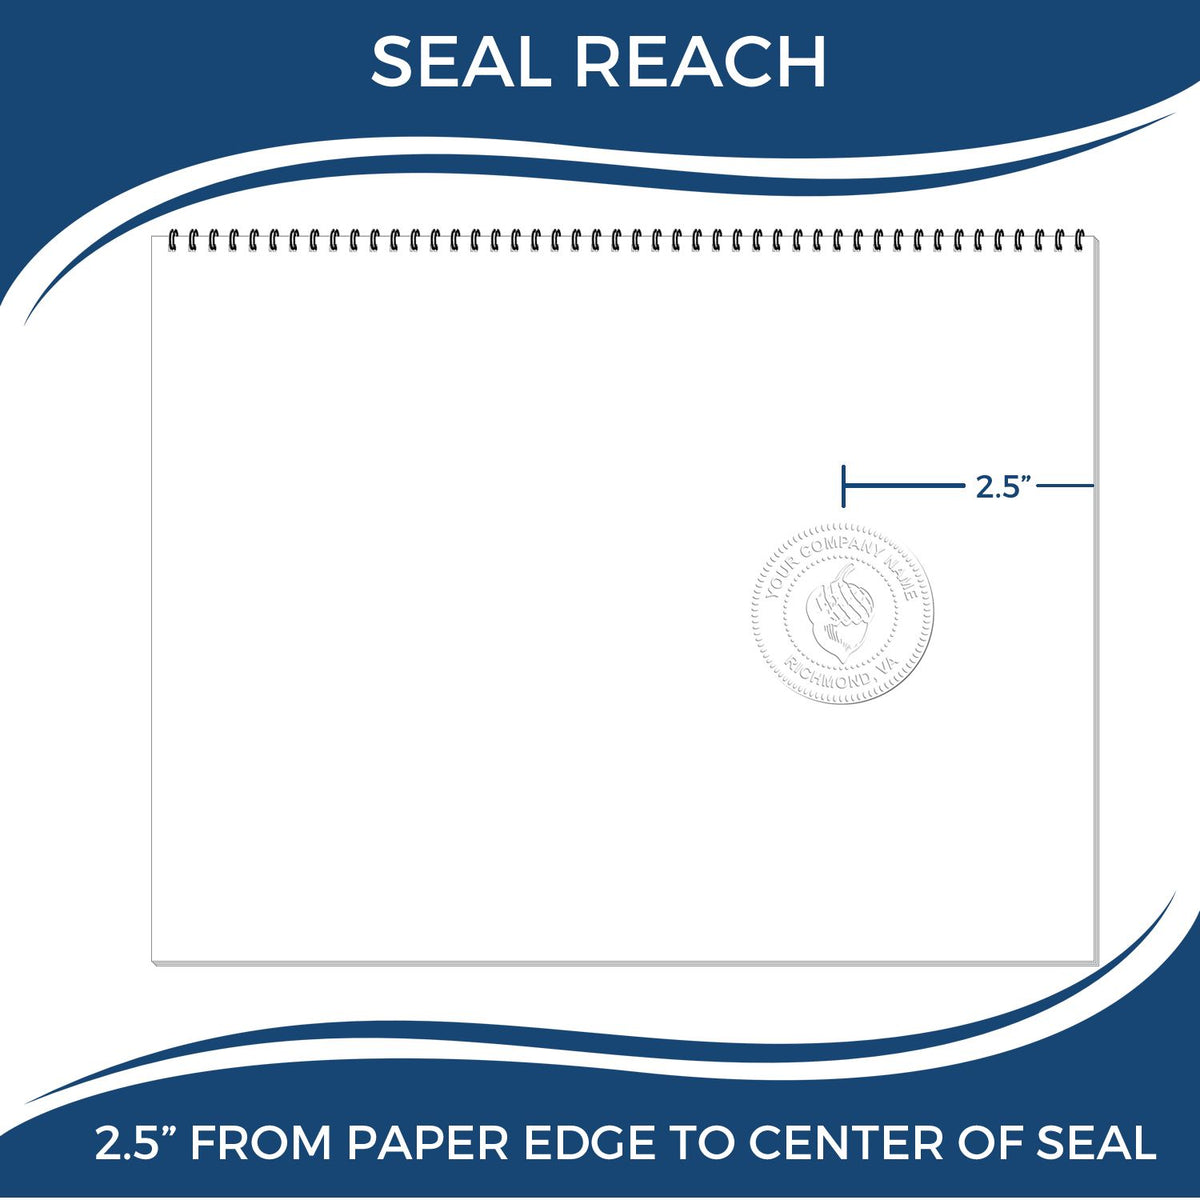 An infographic showing the seal reach which is represented by a ruler and a miniature seal image of the State of Minnesota Long Reach Architectural Embossing Seal